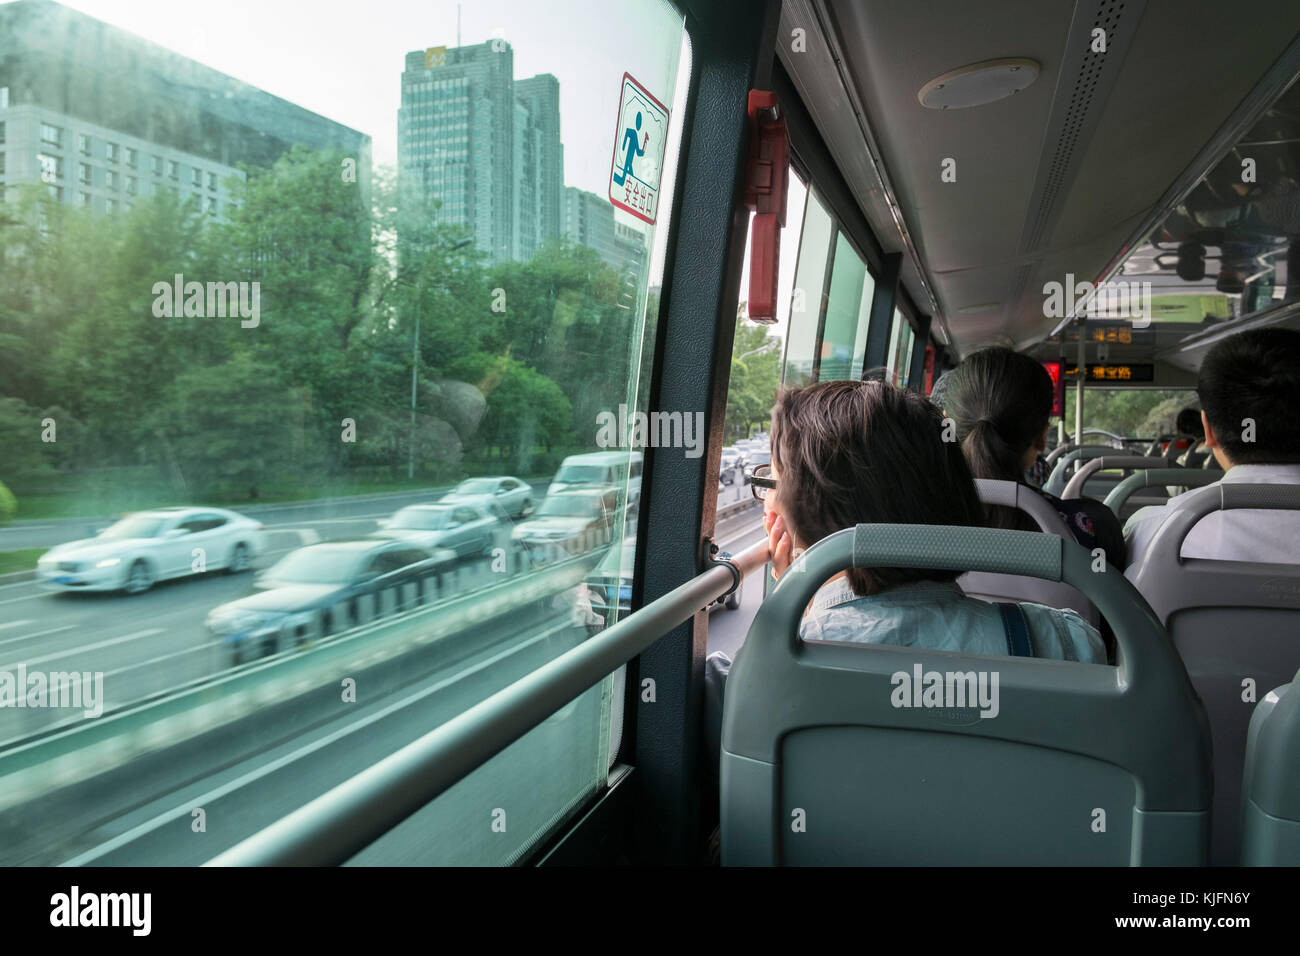 A passenger on a Beijing bus China Stock Photo